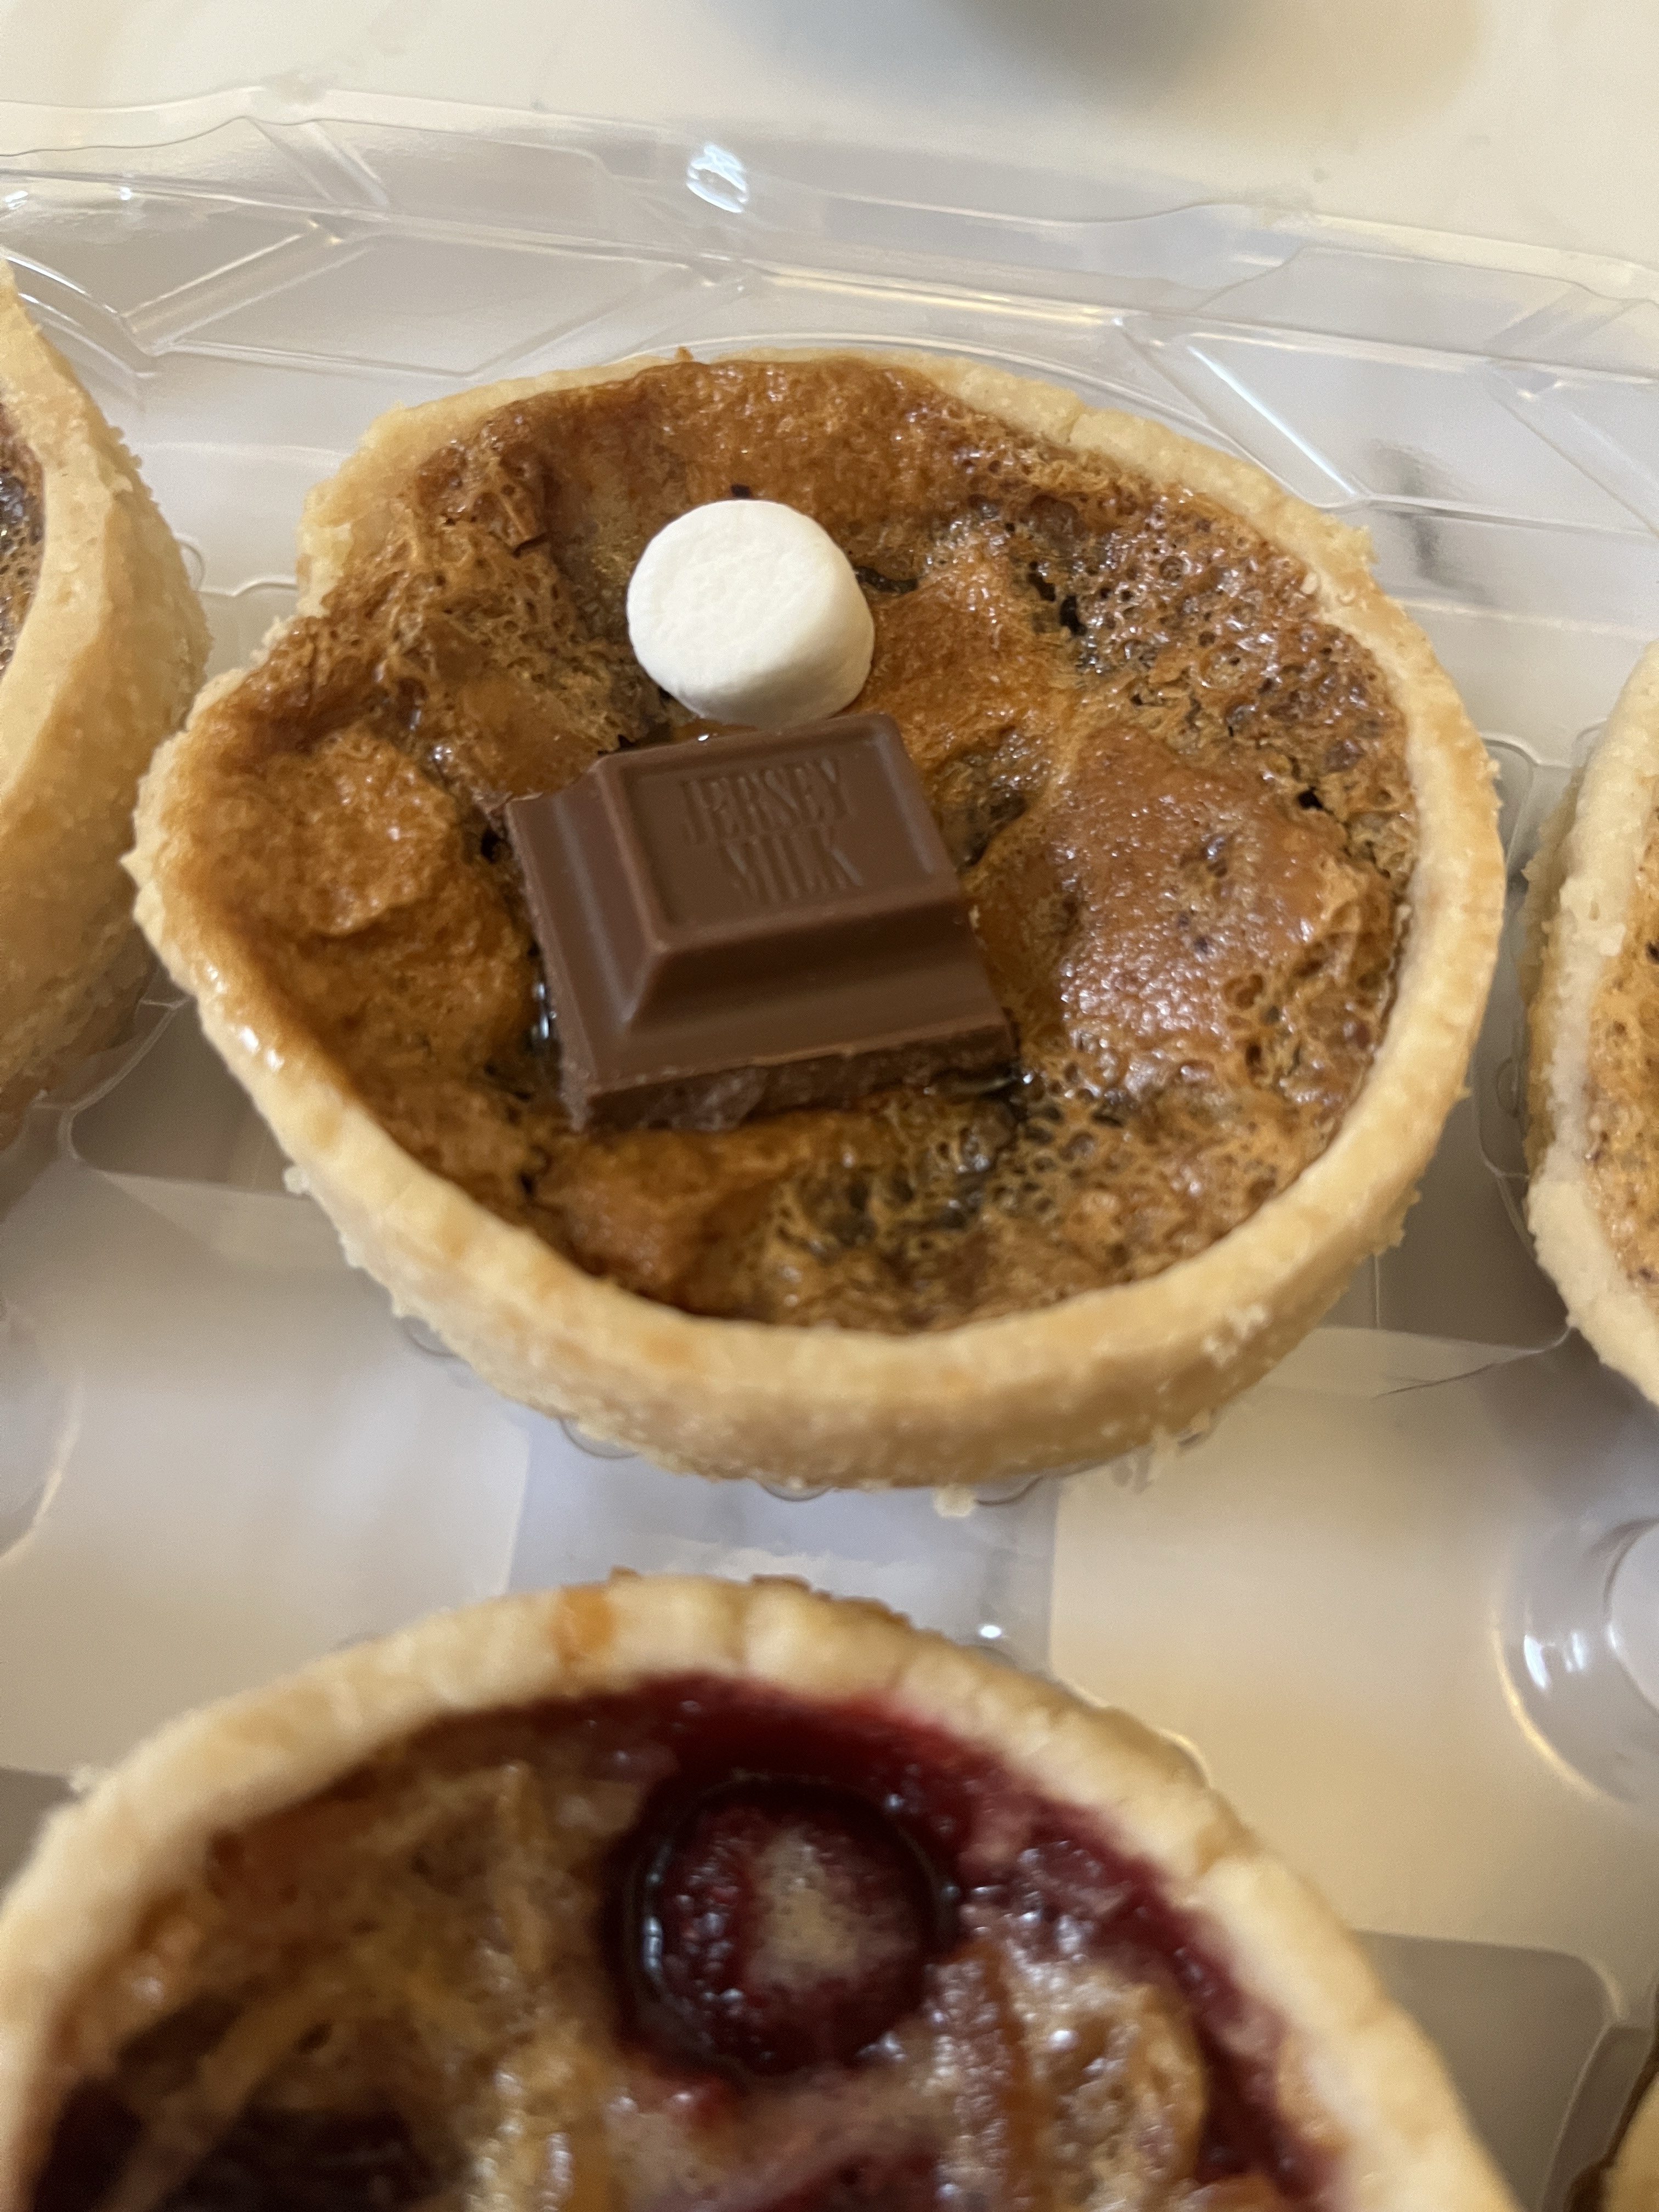 Best Butter Tarts in Ontario: The Sweet Oven Butter Tarts